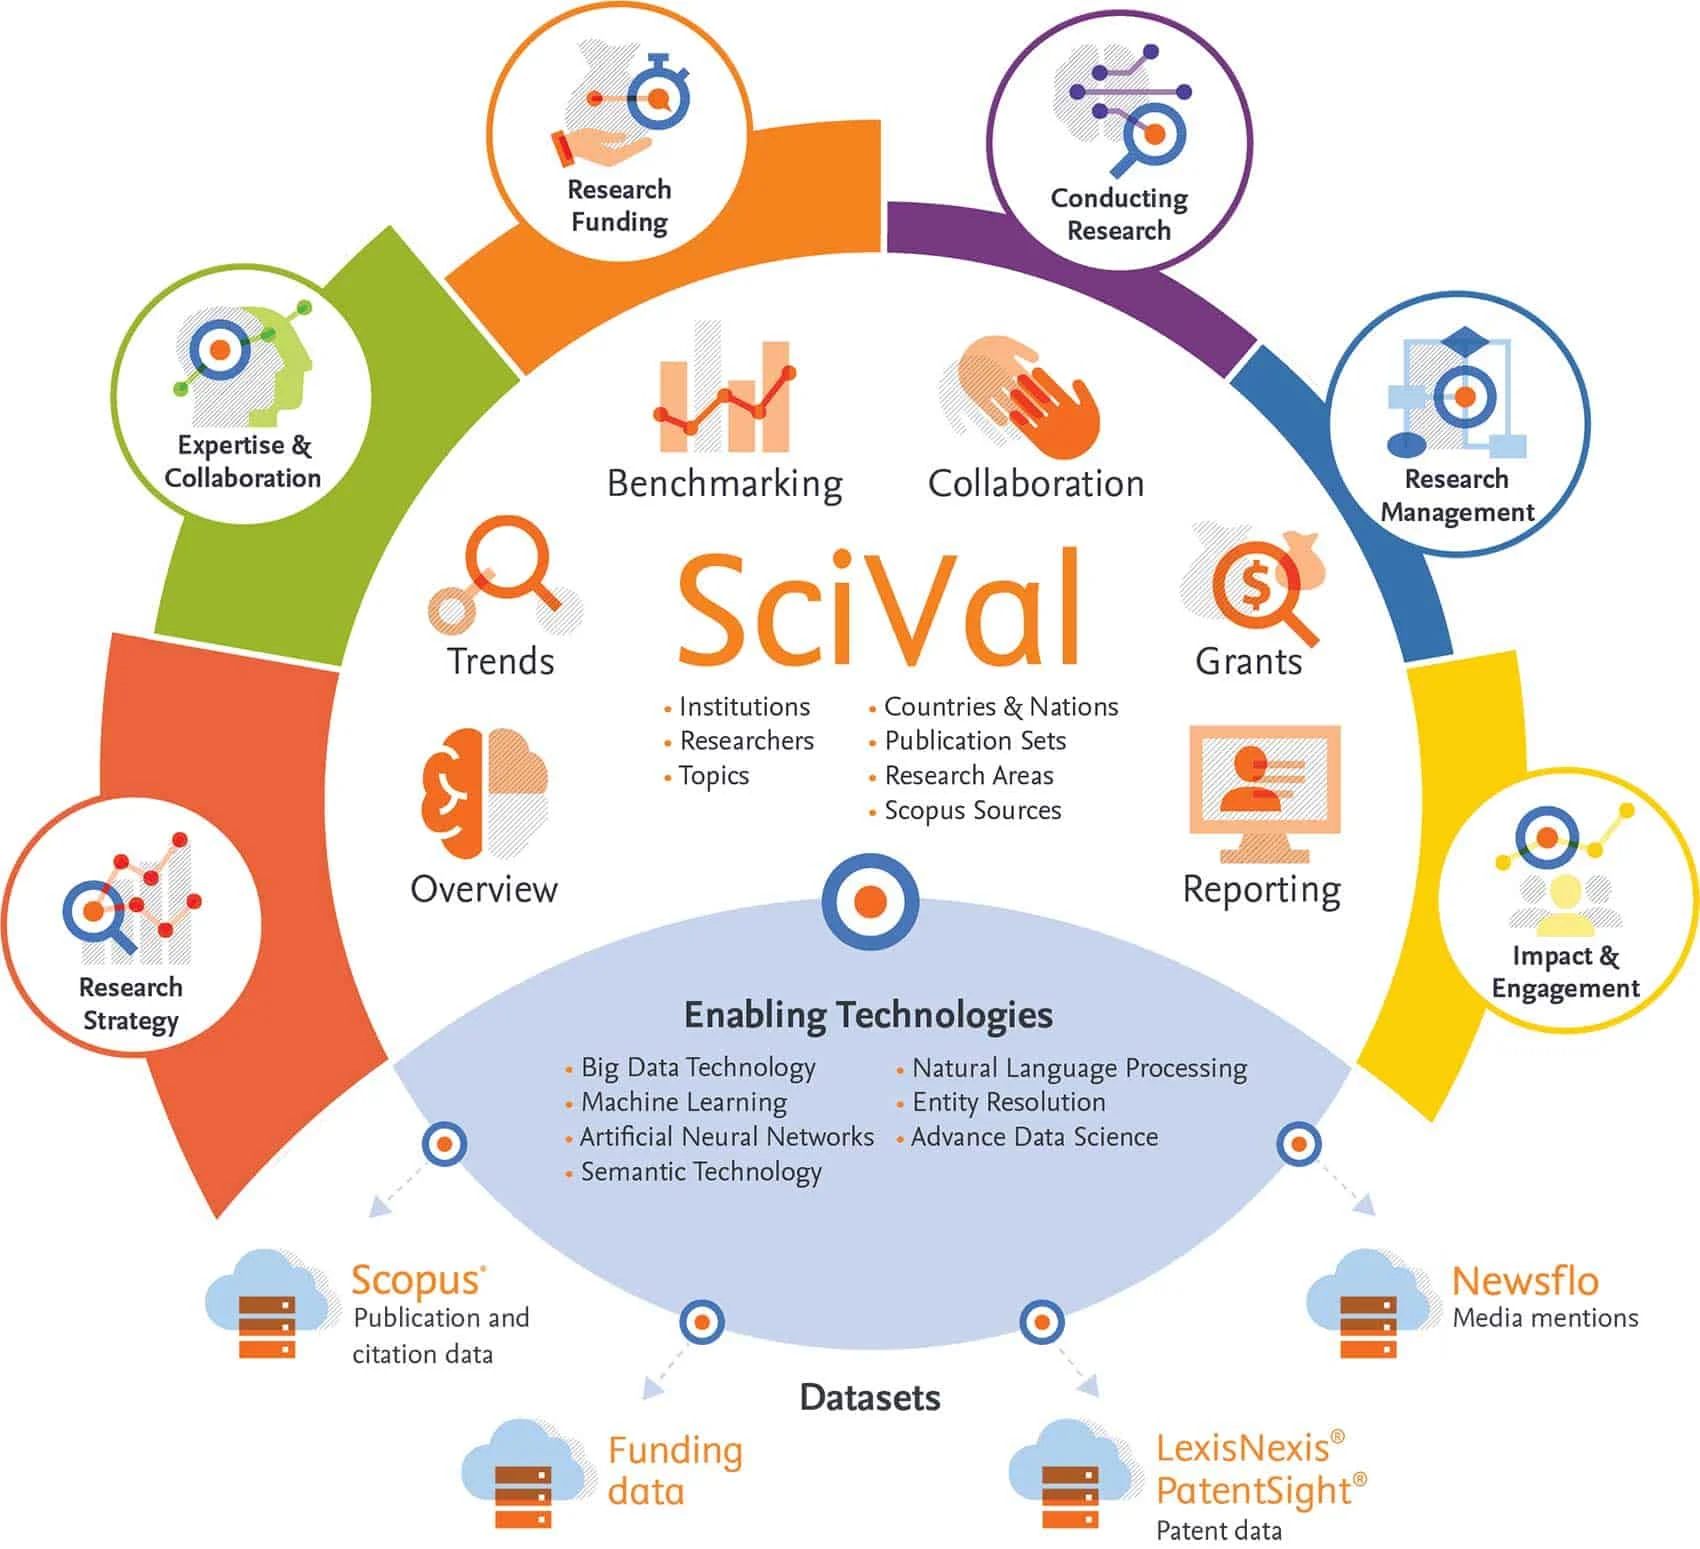 SDG Research is one area SciVal provides insights into.